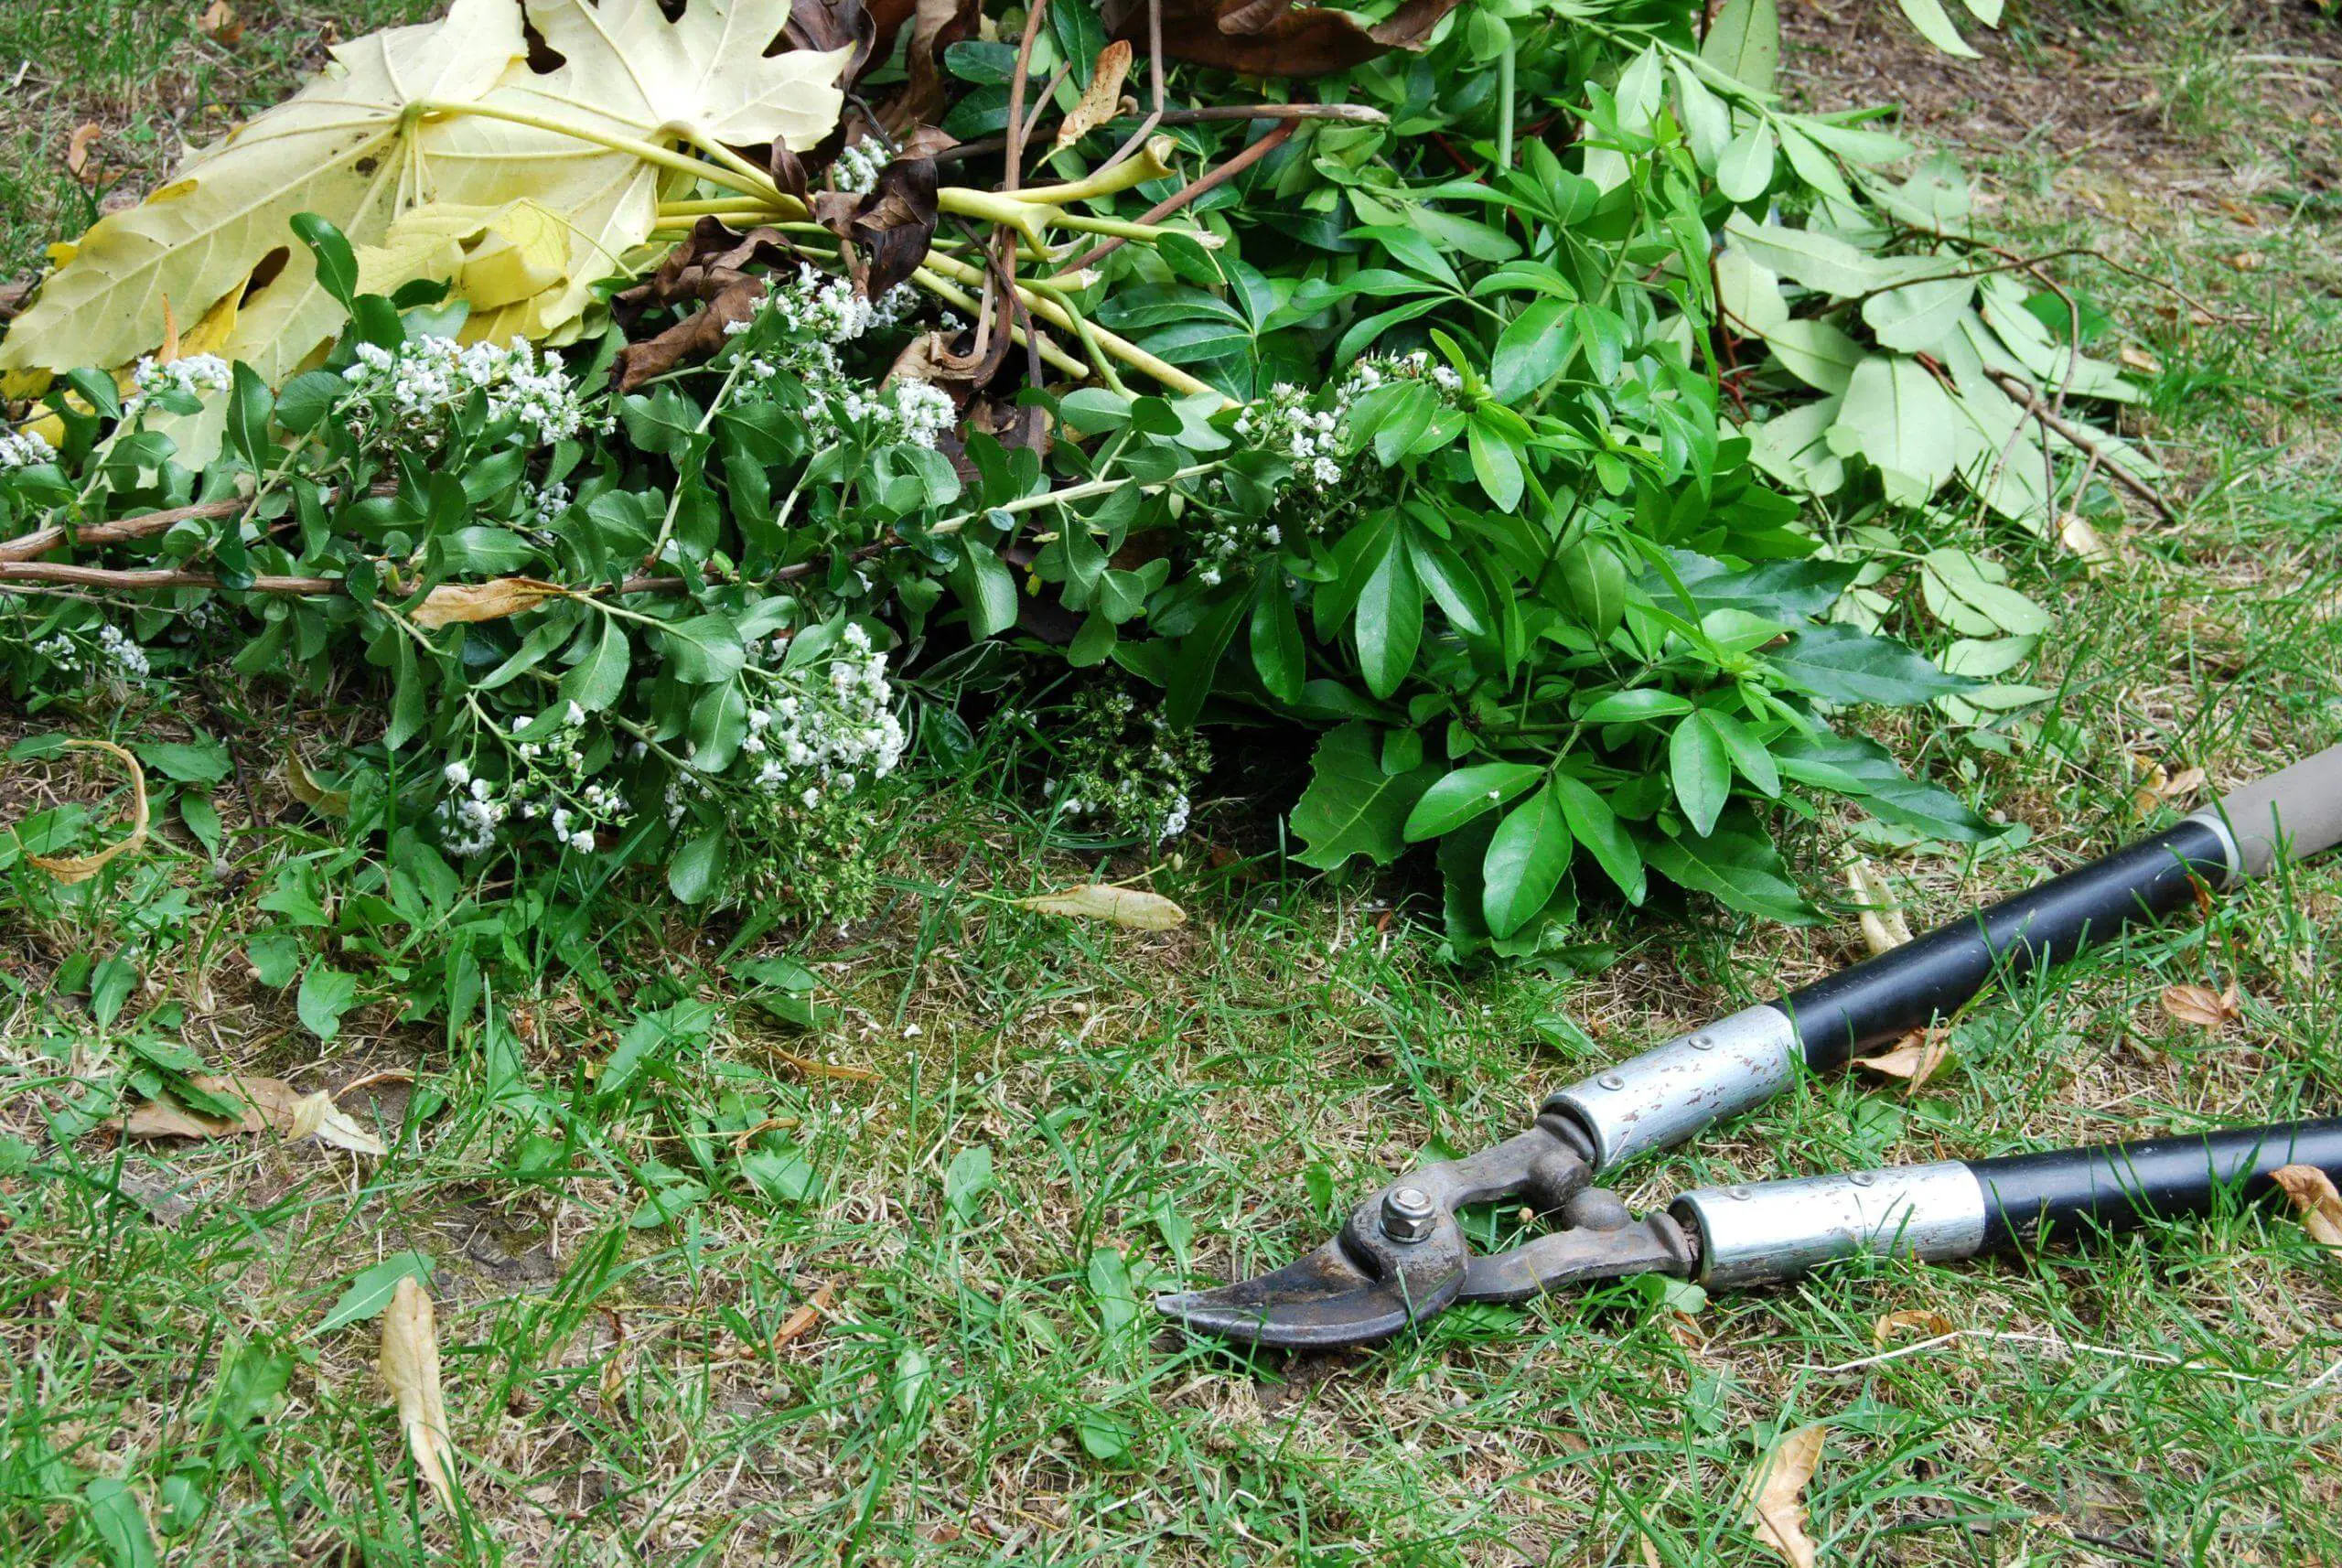 Pruning loppers for gardening and pile of leaves on lawn